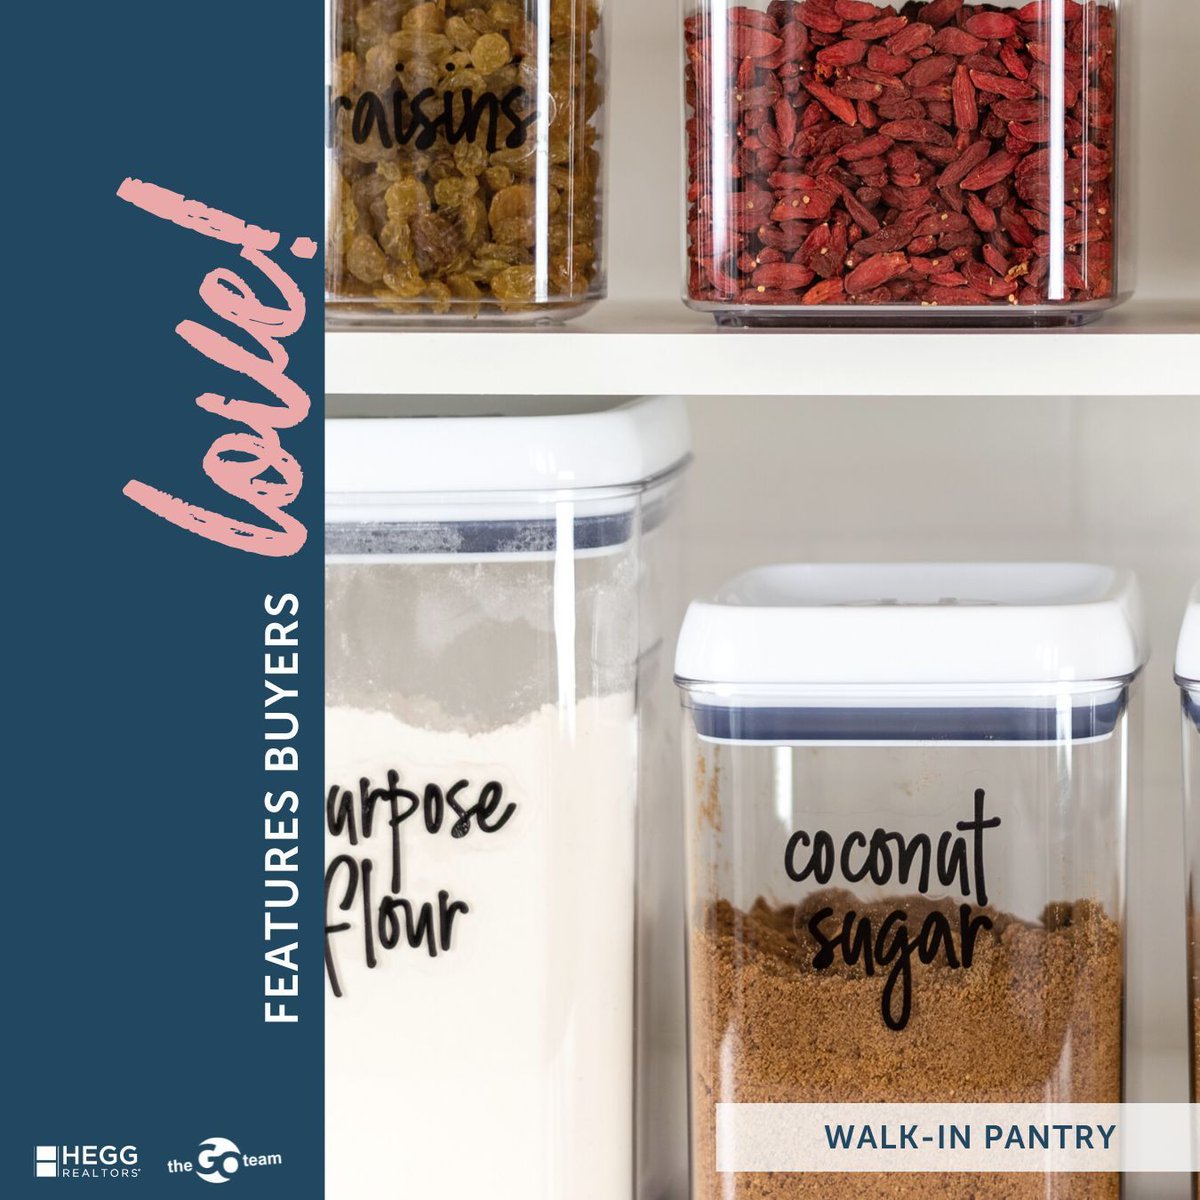 Homebuyers love a walk-in pantry! They provide an ample, organized storage space, improve kitchen efficiency, and contribute to the overall organization and aesthetics of the home. 
#walkinpantry #thegoteam #soldsiouxfalls #realestate #siouxfallsrealestate